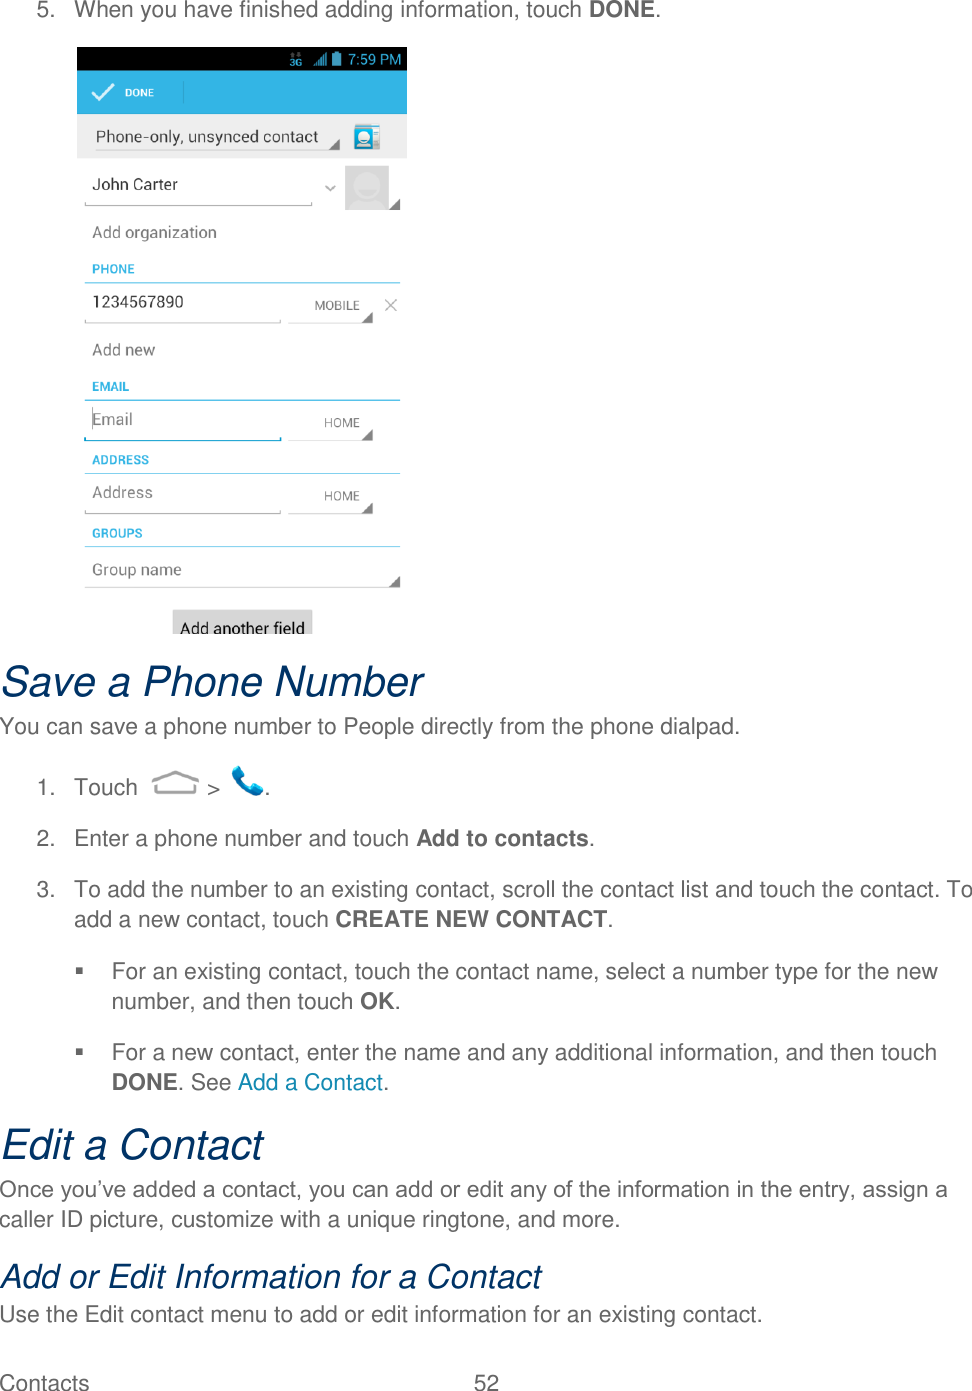 Contacts  52   5.  When you have finished adding information, touch DONE.  Save a Phone Number You can save a phone number to People directly from the phone dialpad. 1.  Touch   &gt;  . 2.  Enter a phone number and touch Add to contacts. 3.  To add the number to an existing contact, scroll the contact list and touch the contact. To add a new contact, touch CREATE NEW CONTACT.   For an existing contact, touch the contact name, select a number type for the new number, and then touch OK.   For a new contact, enter the name and any additional information, and then touch DONE. See Add a Contact. Edit a Contact Once you‟ve added a contact, you can add or edit any of the information in the entry, assign a caller ID picture, customize with a unique ringtone, and more. Add or Edit Information for a Contact Use the Edit contact menu to add or edit information for an existing contact. 